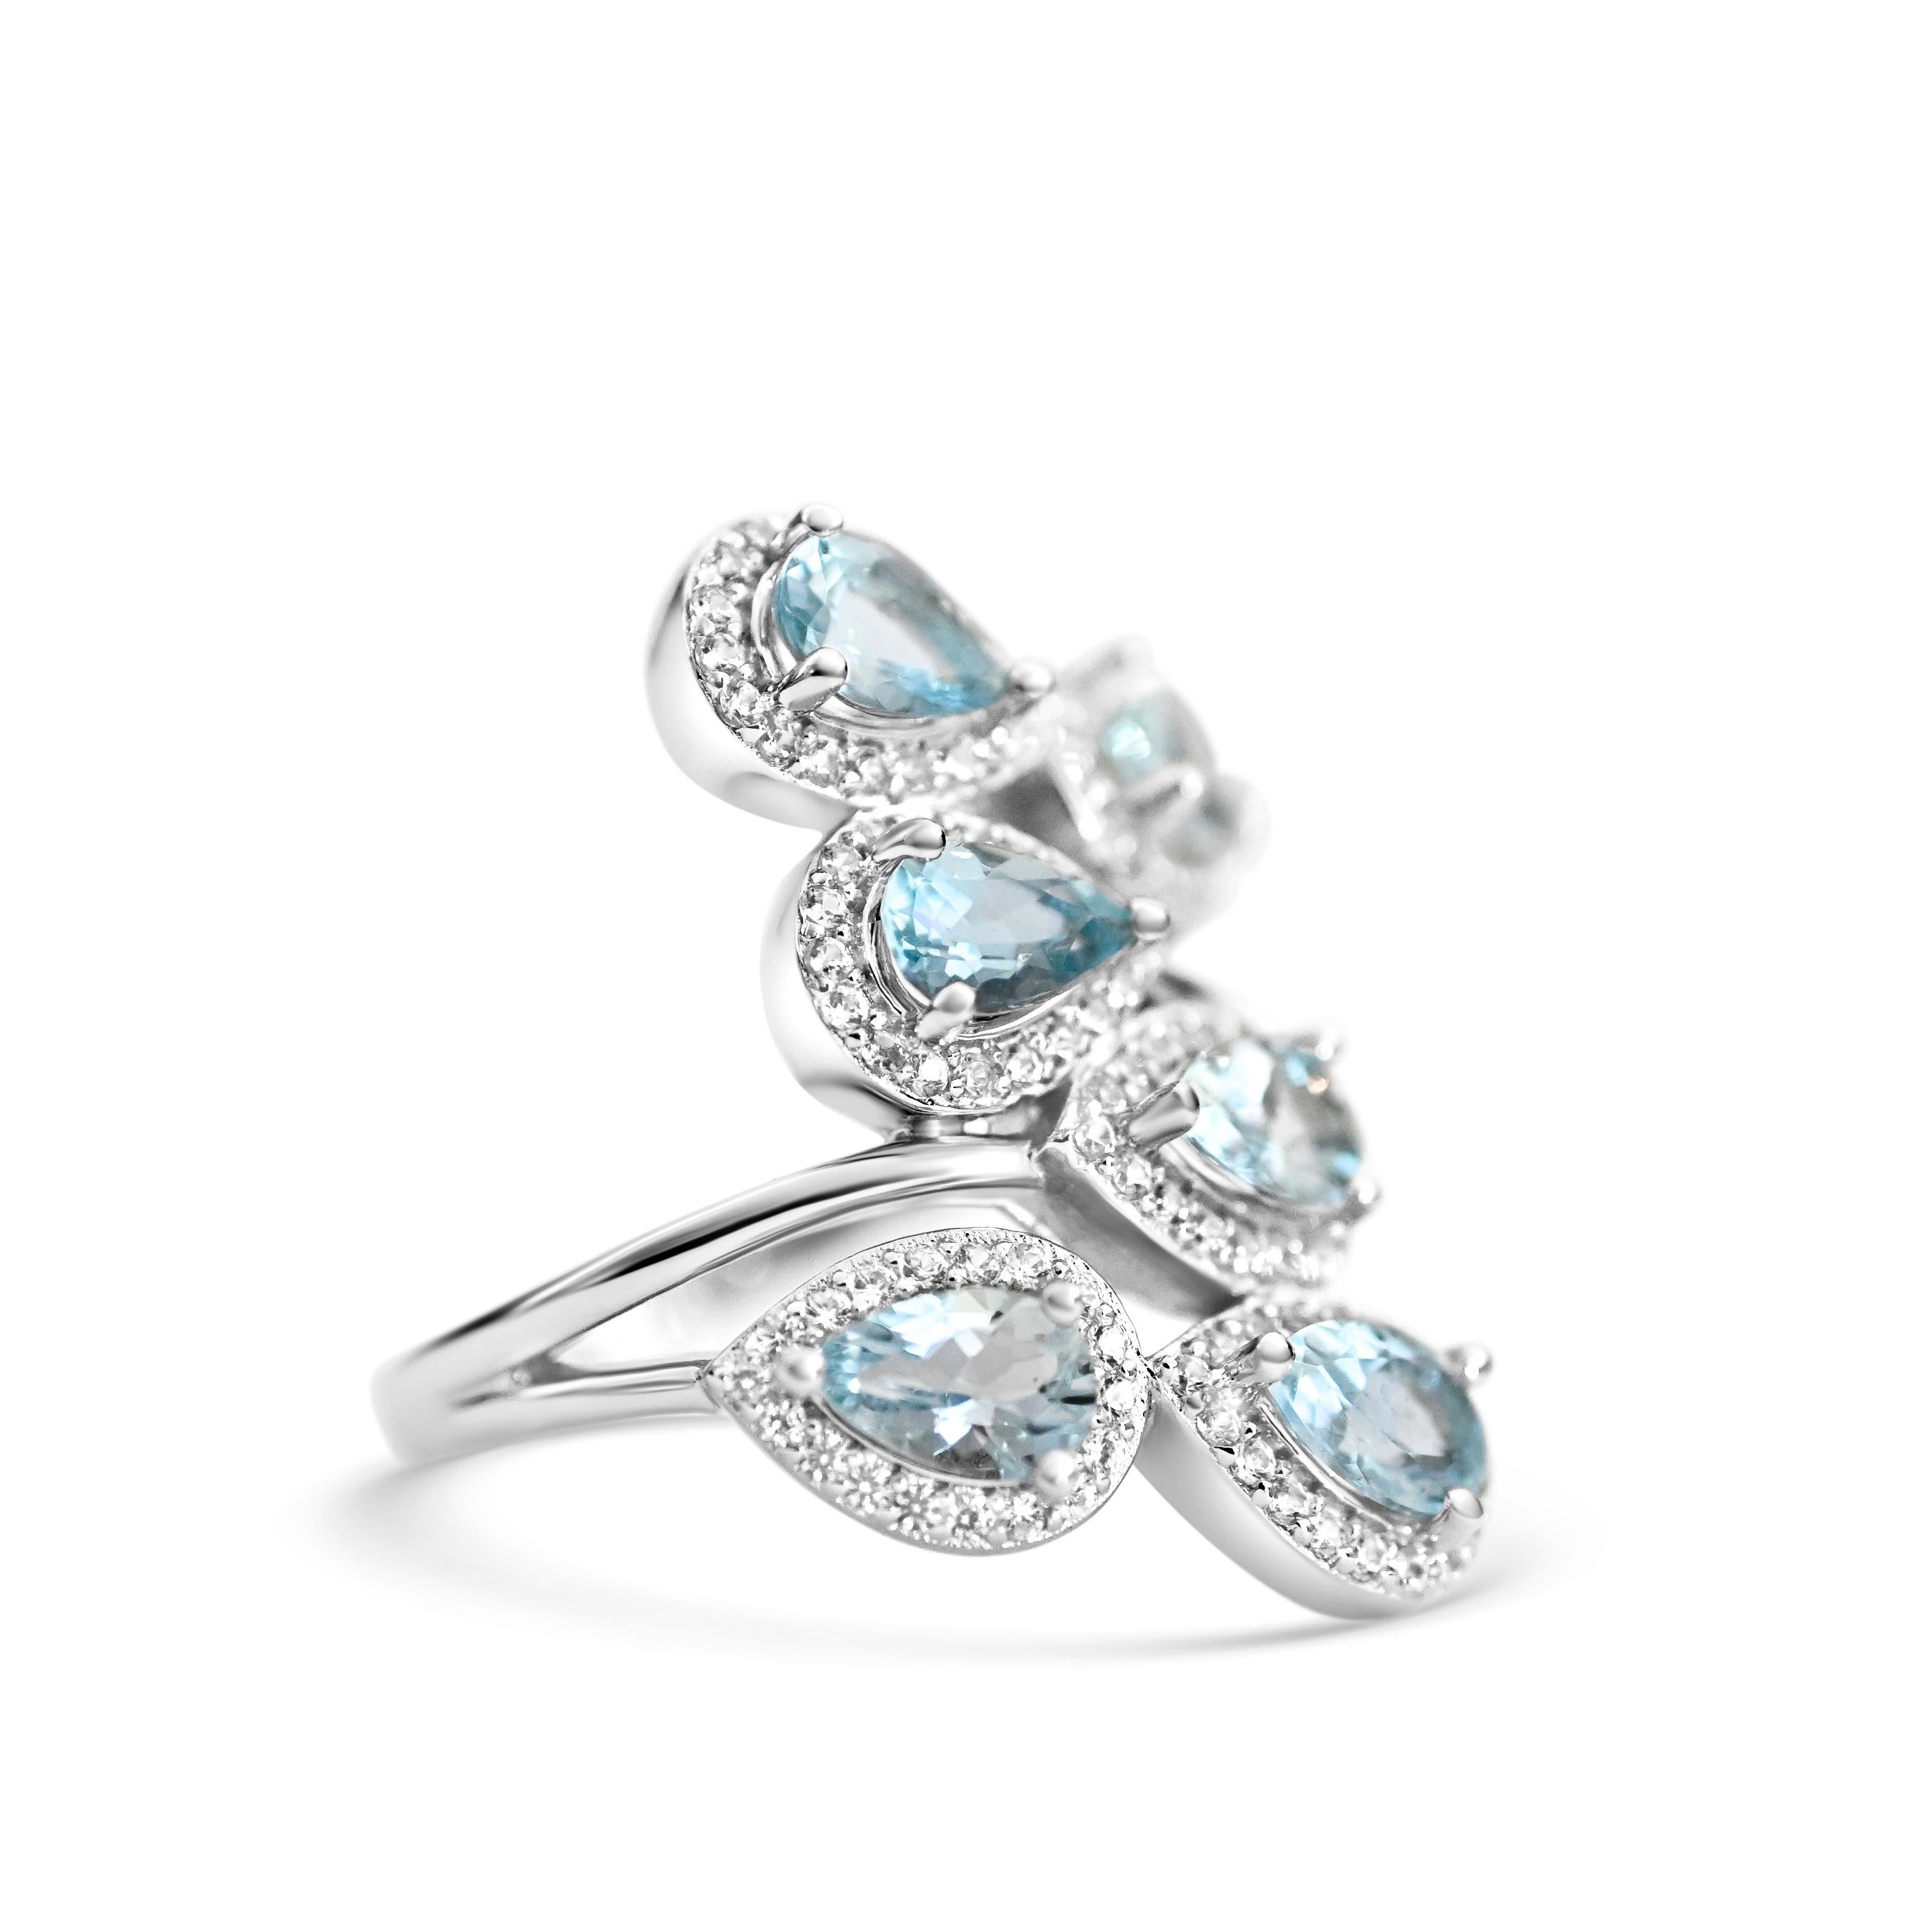 Welcome to Blue Star Gems NY LLC! Discover popular Cluster Rings designs from classic to vintage inspired. We offer Joyful jewelry for everyday wear. Just for you. We go above and beyond the current industry standards to offer conflict-free